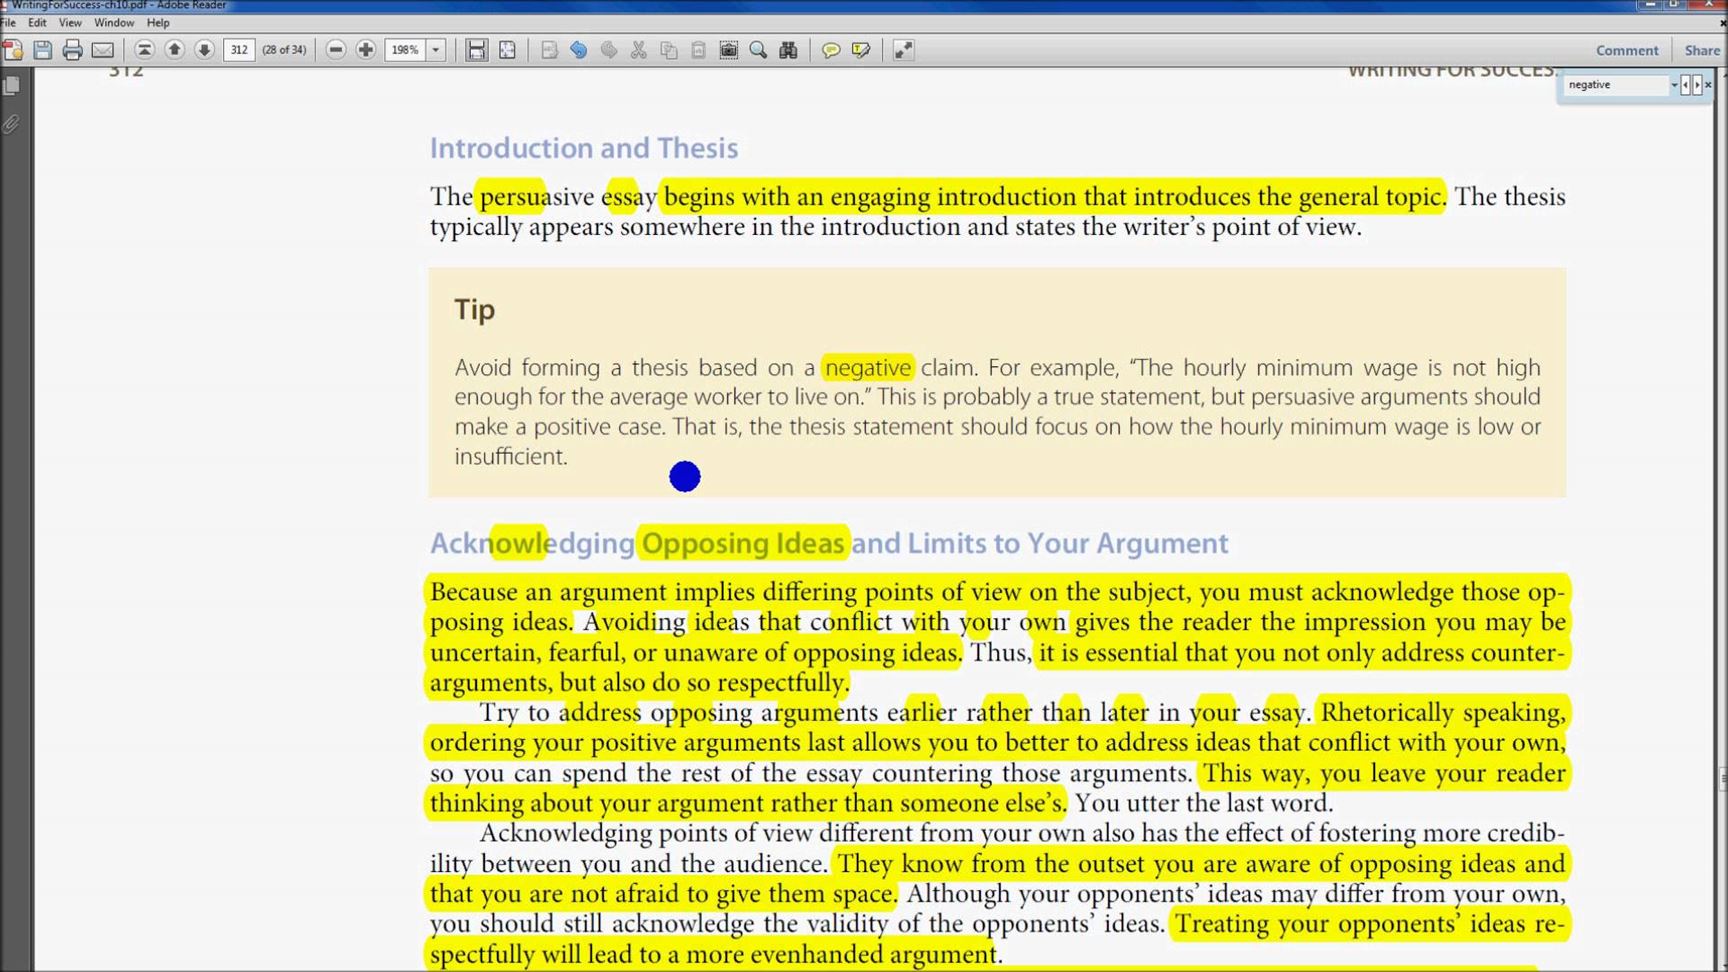 copy highlighted text from pdf